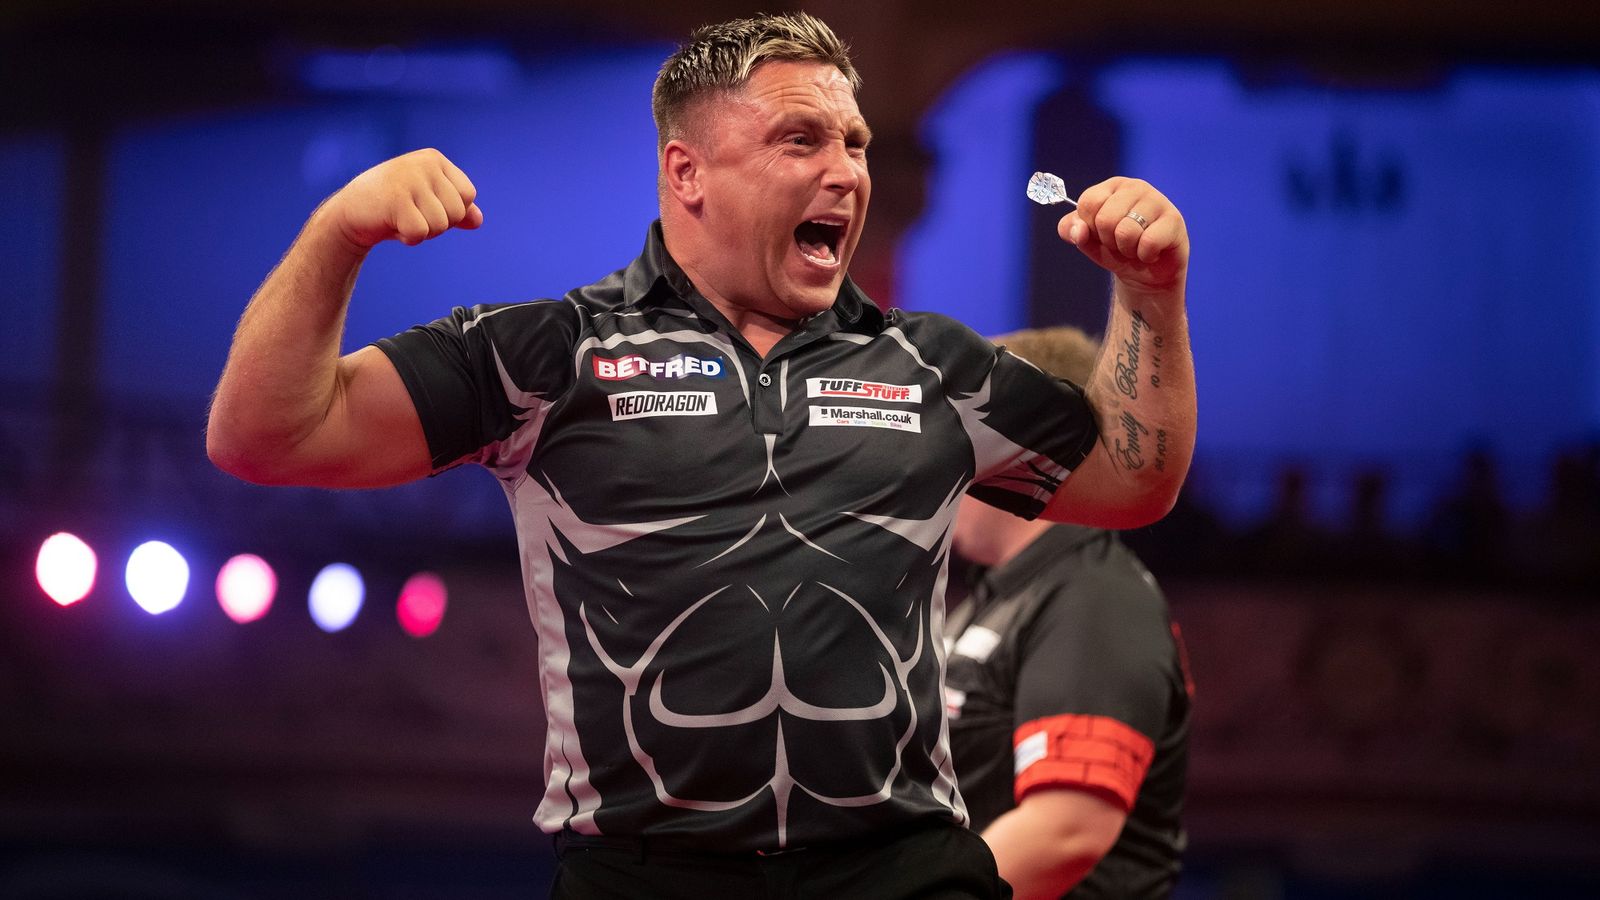 World Matchplay Darts: Jose de Sousa, Gerwyn Price and Michael Smith take to the stage in Blackpool